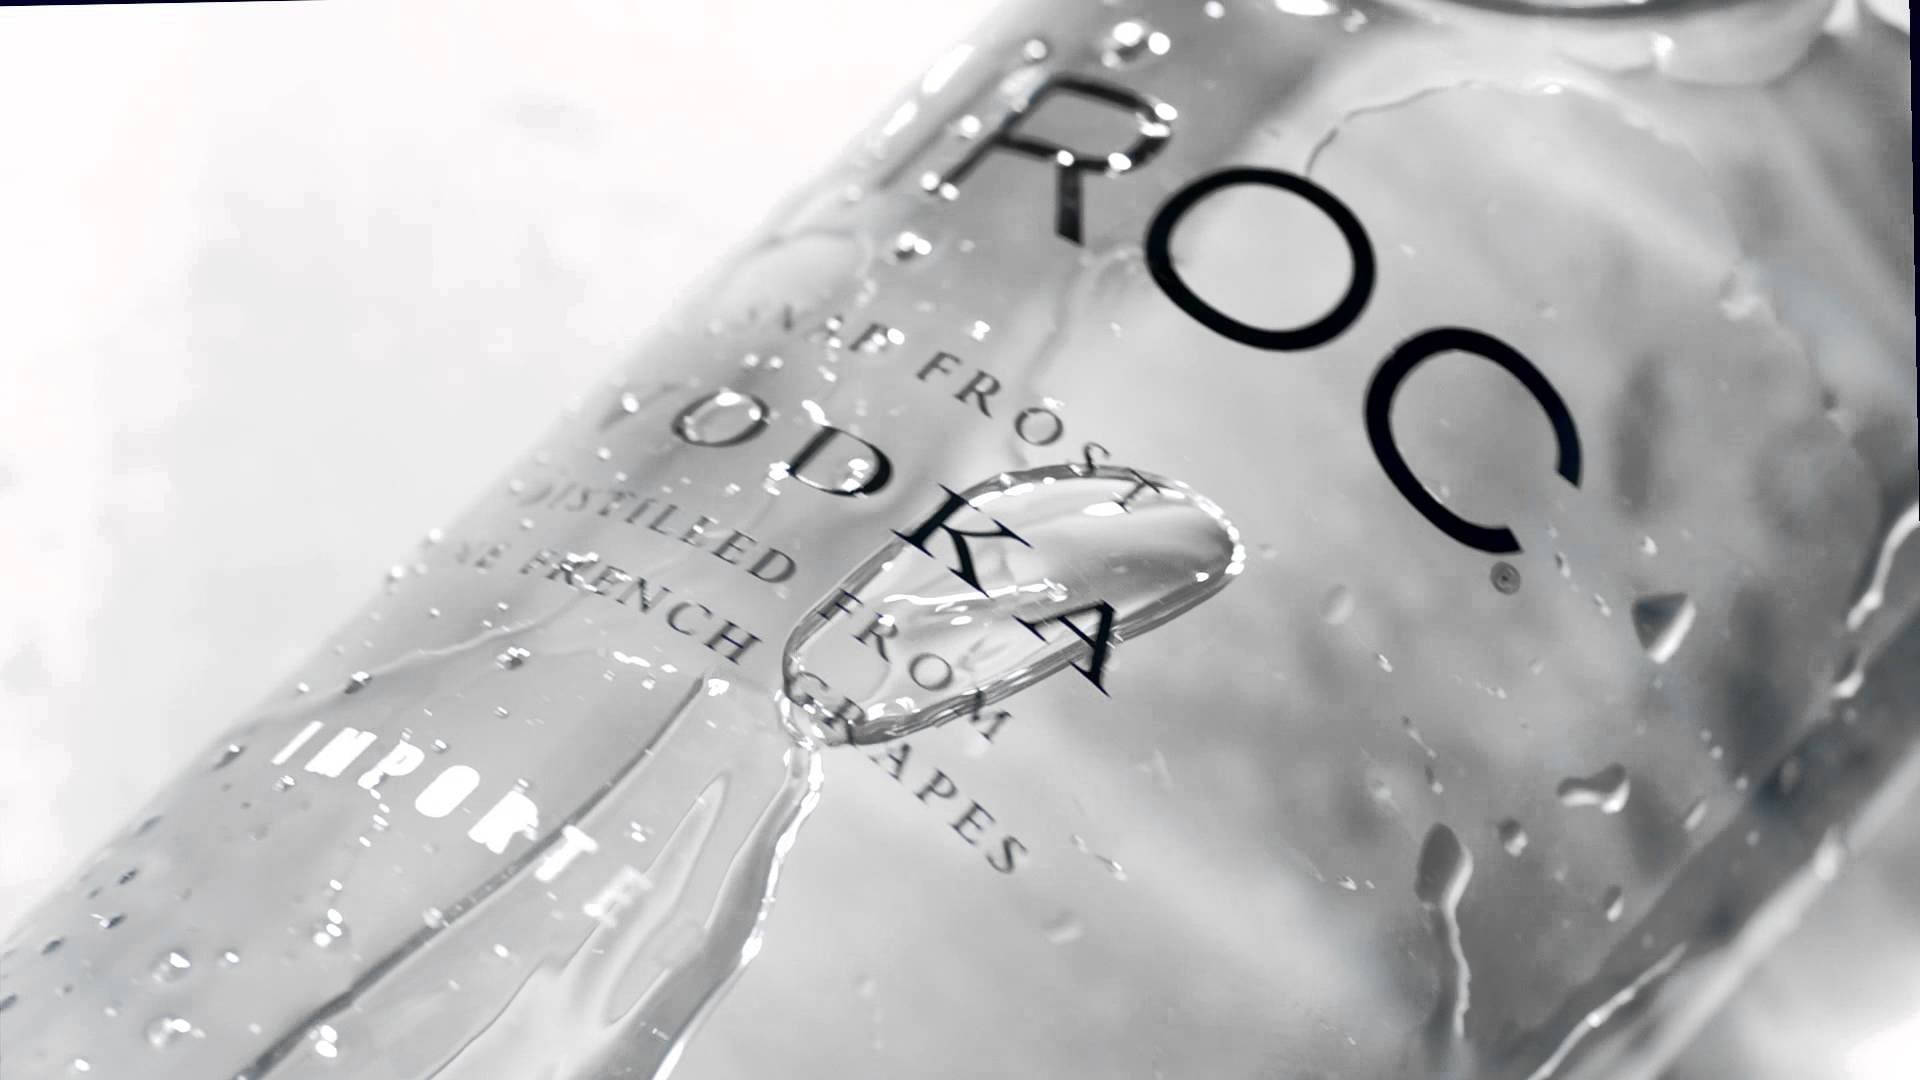 Exquisite Ciroc Snap Frost French Vodka Bottle close-up Wallpaper